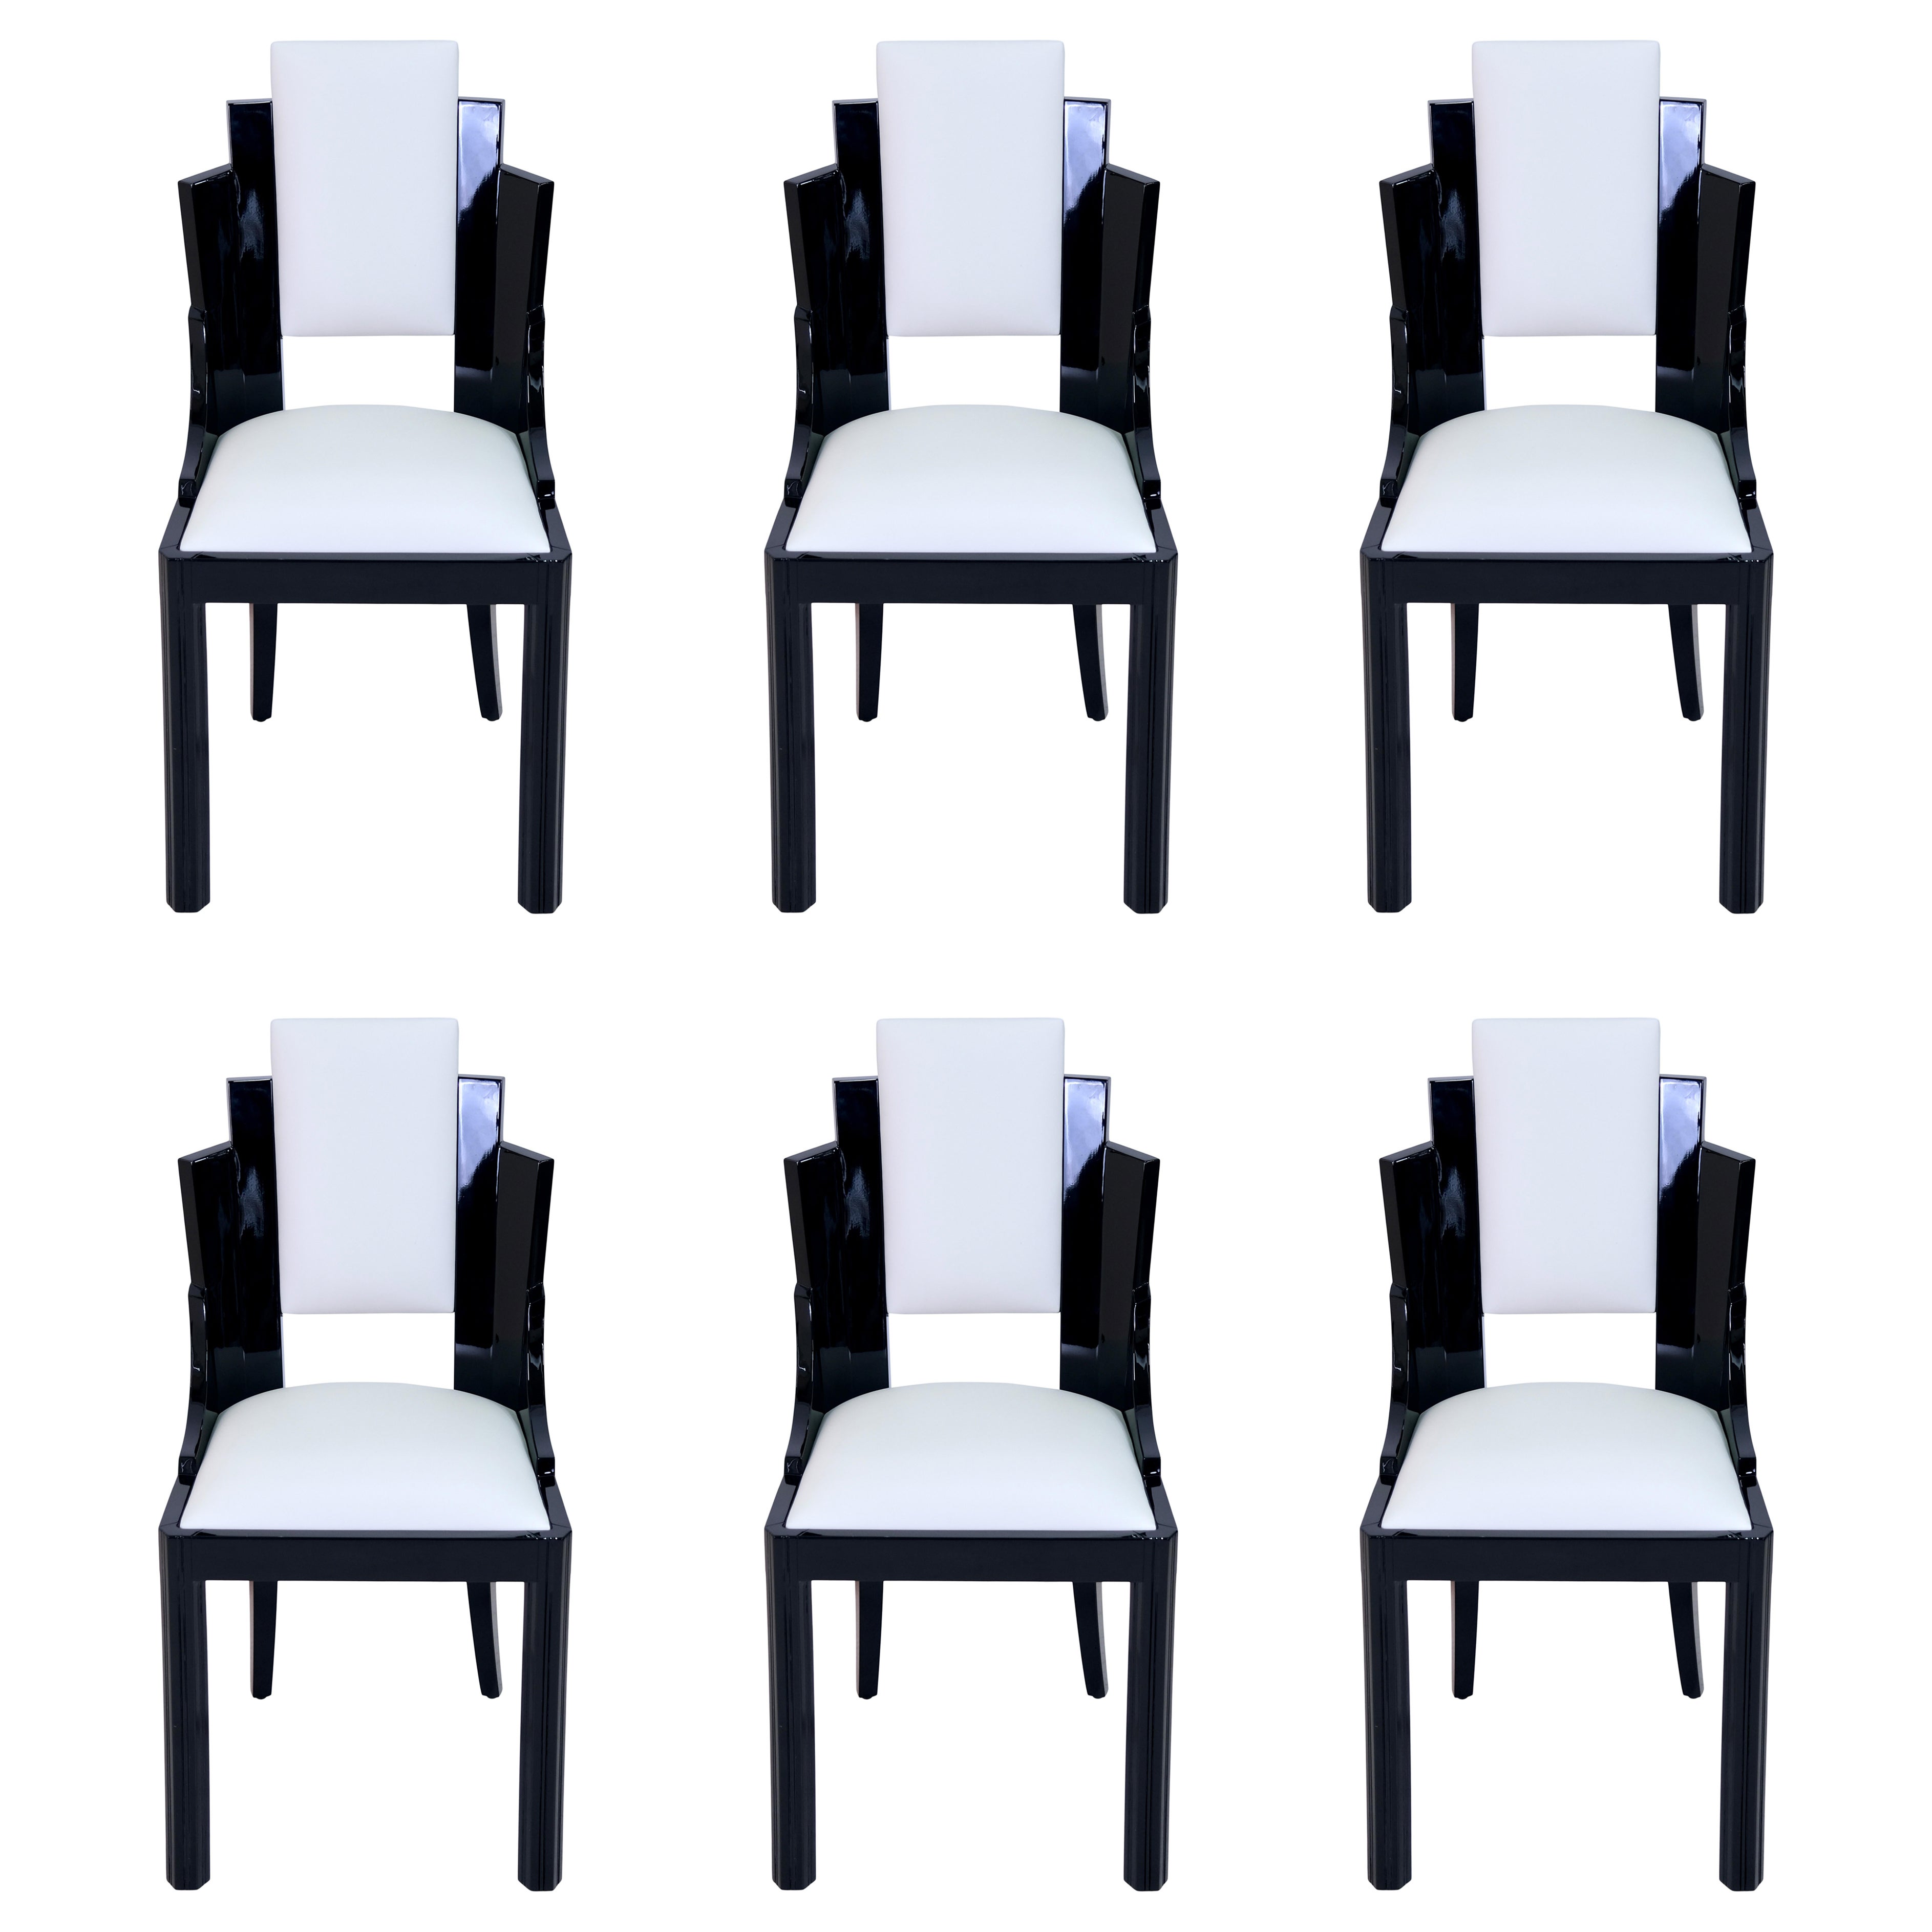 Set of Six 1930s Art Deco Dining Room Chairs in Black Lacquer and White Leather